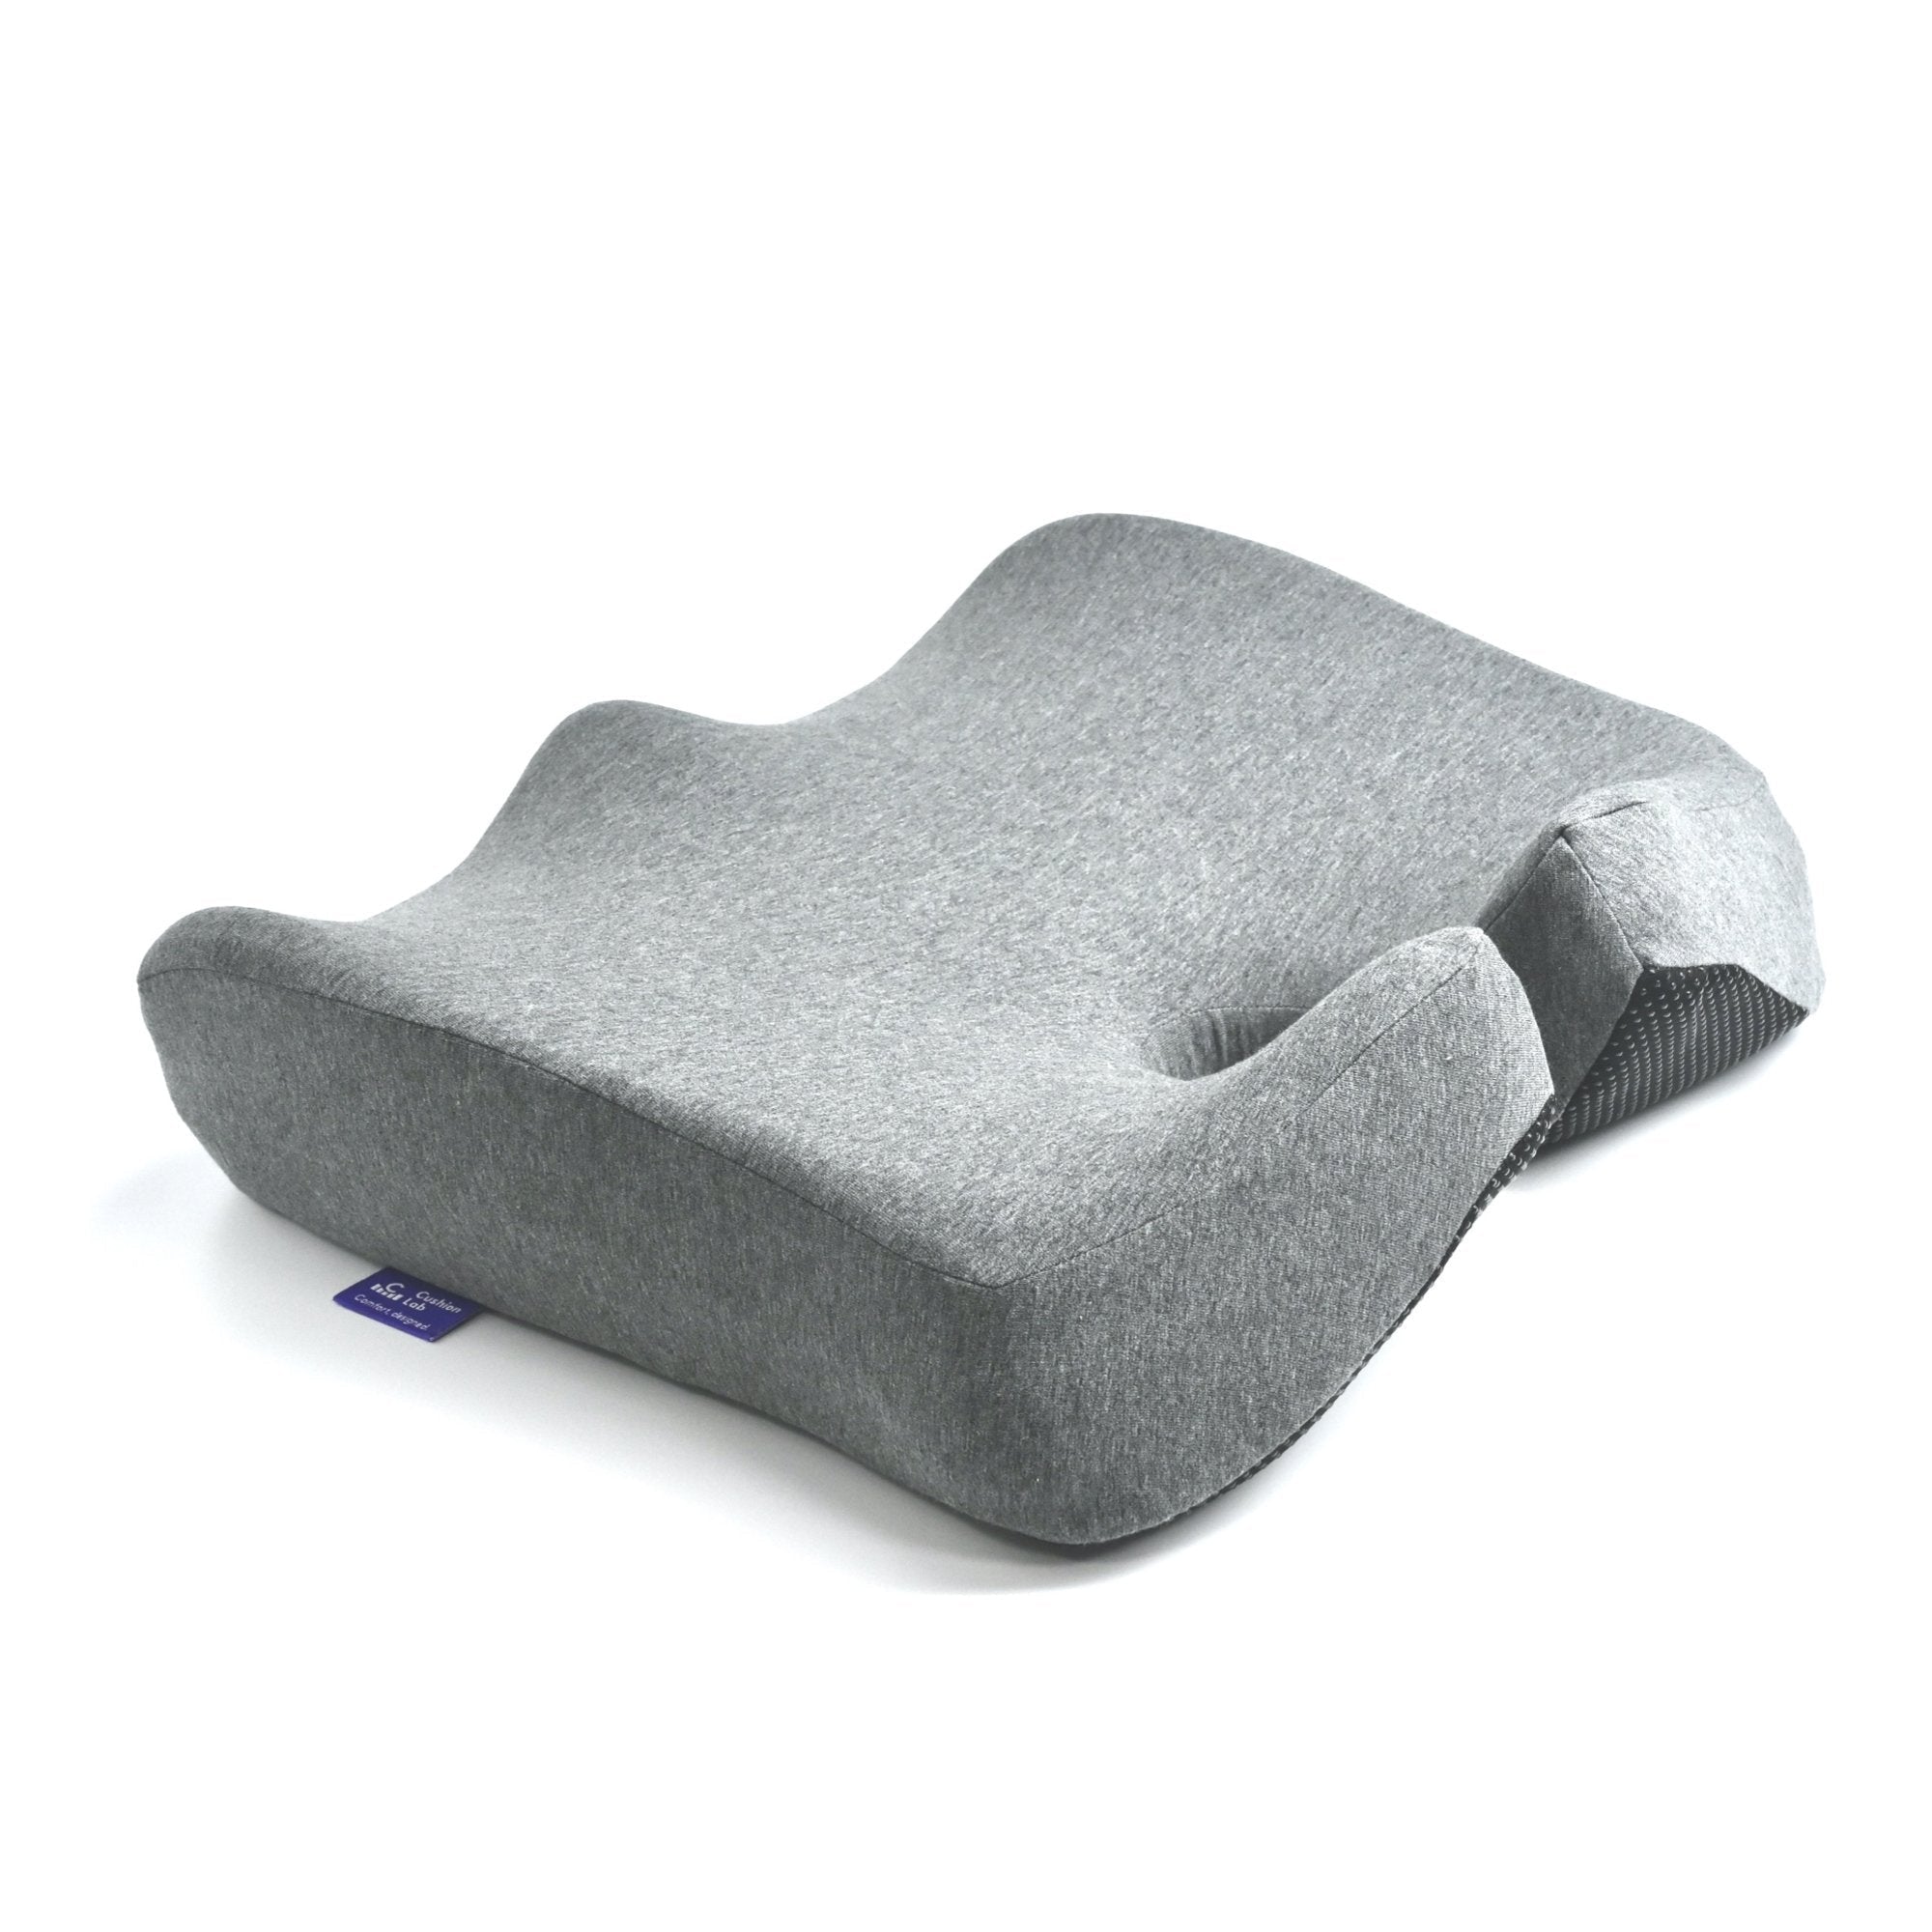 Cushion Lab Seat Cushion review: Pressure relief at a cost - Reviewed